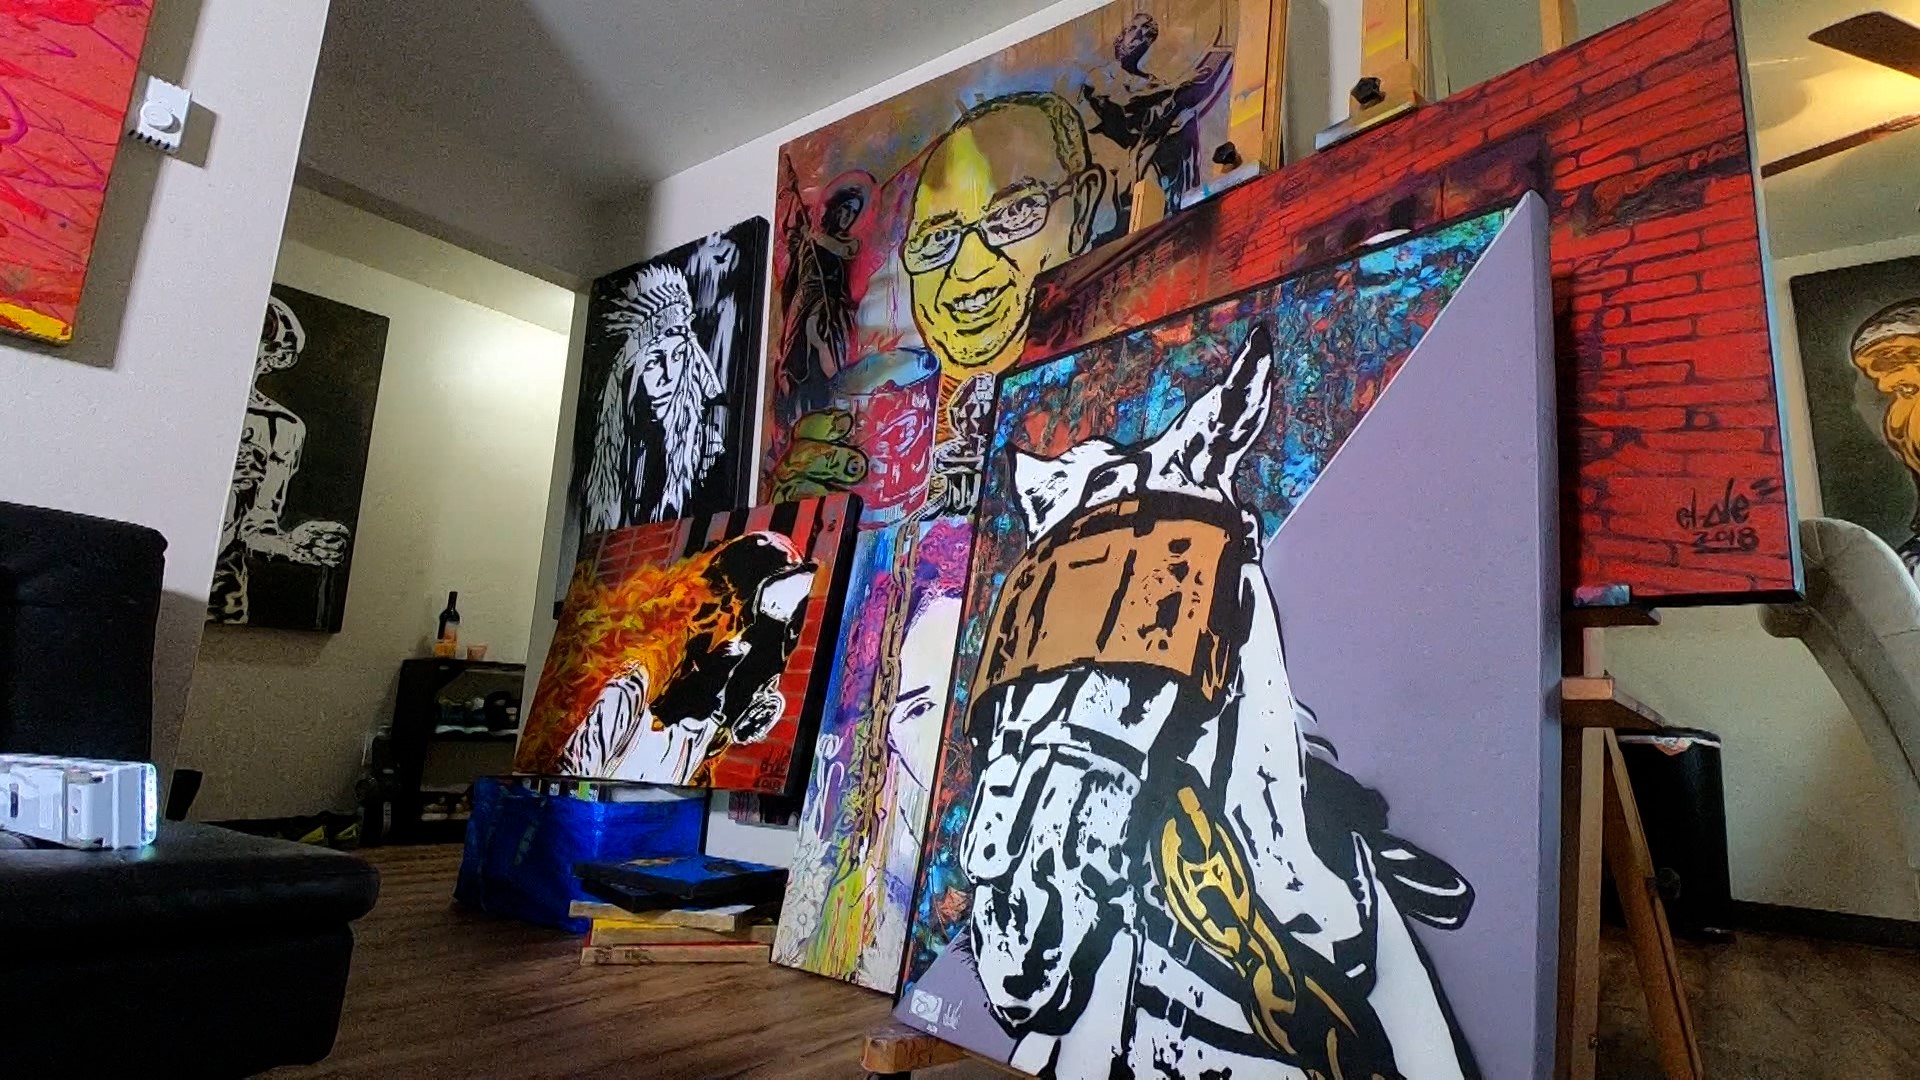 Alex Siniscalchi is focused on creating street art with passion and purpose. #k5evening